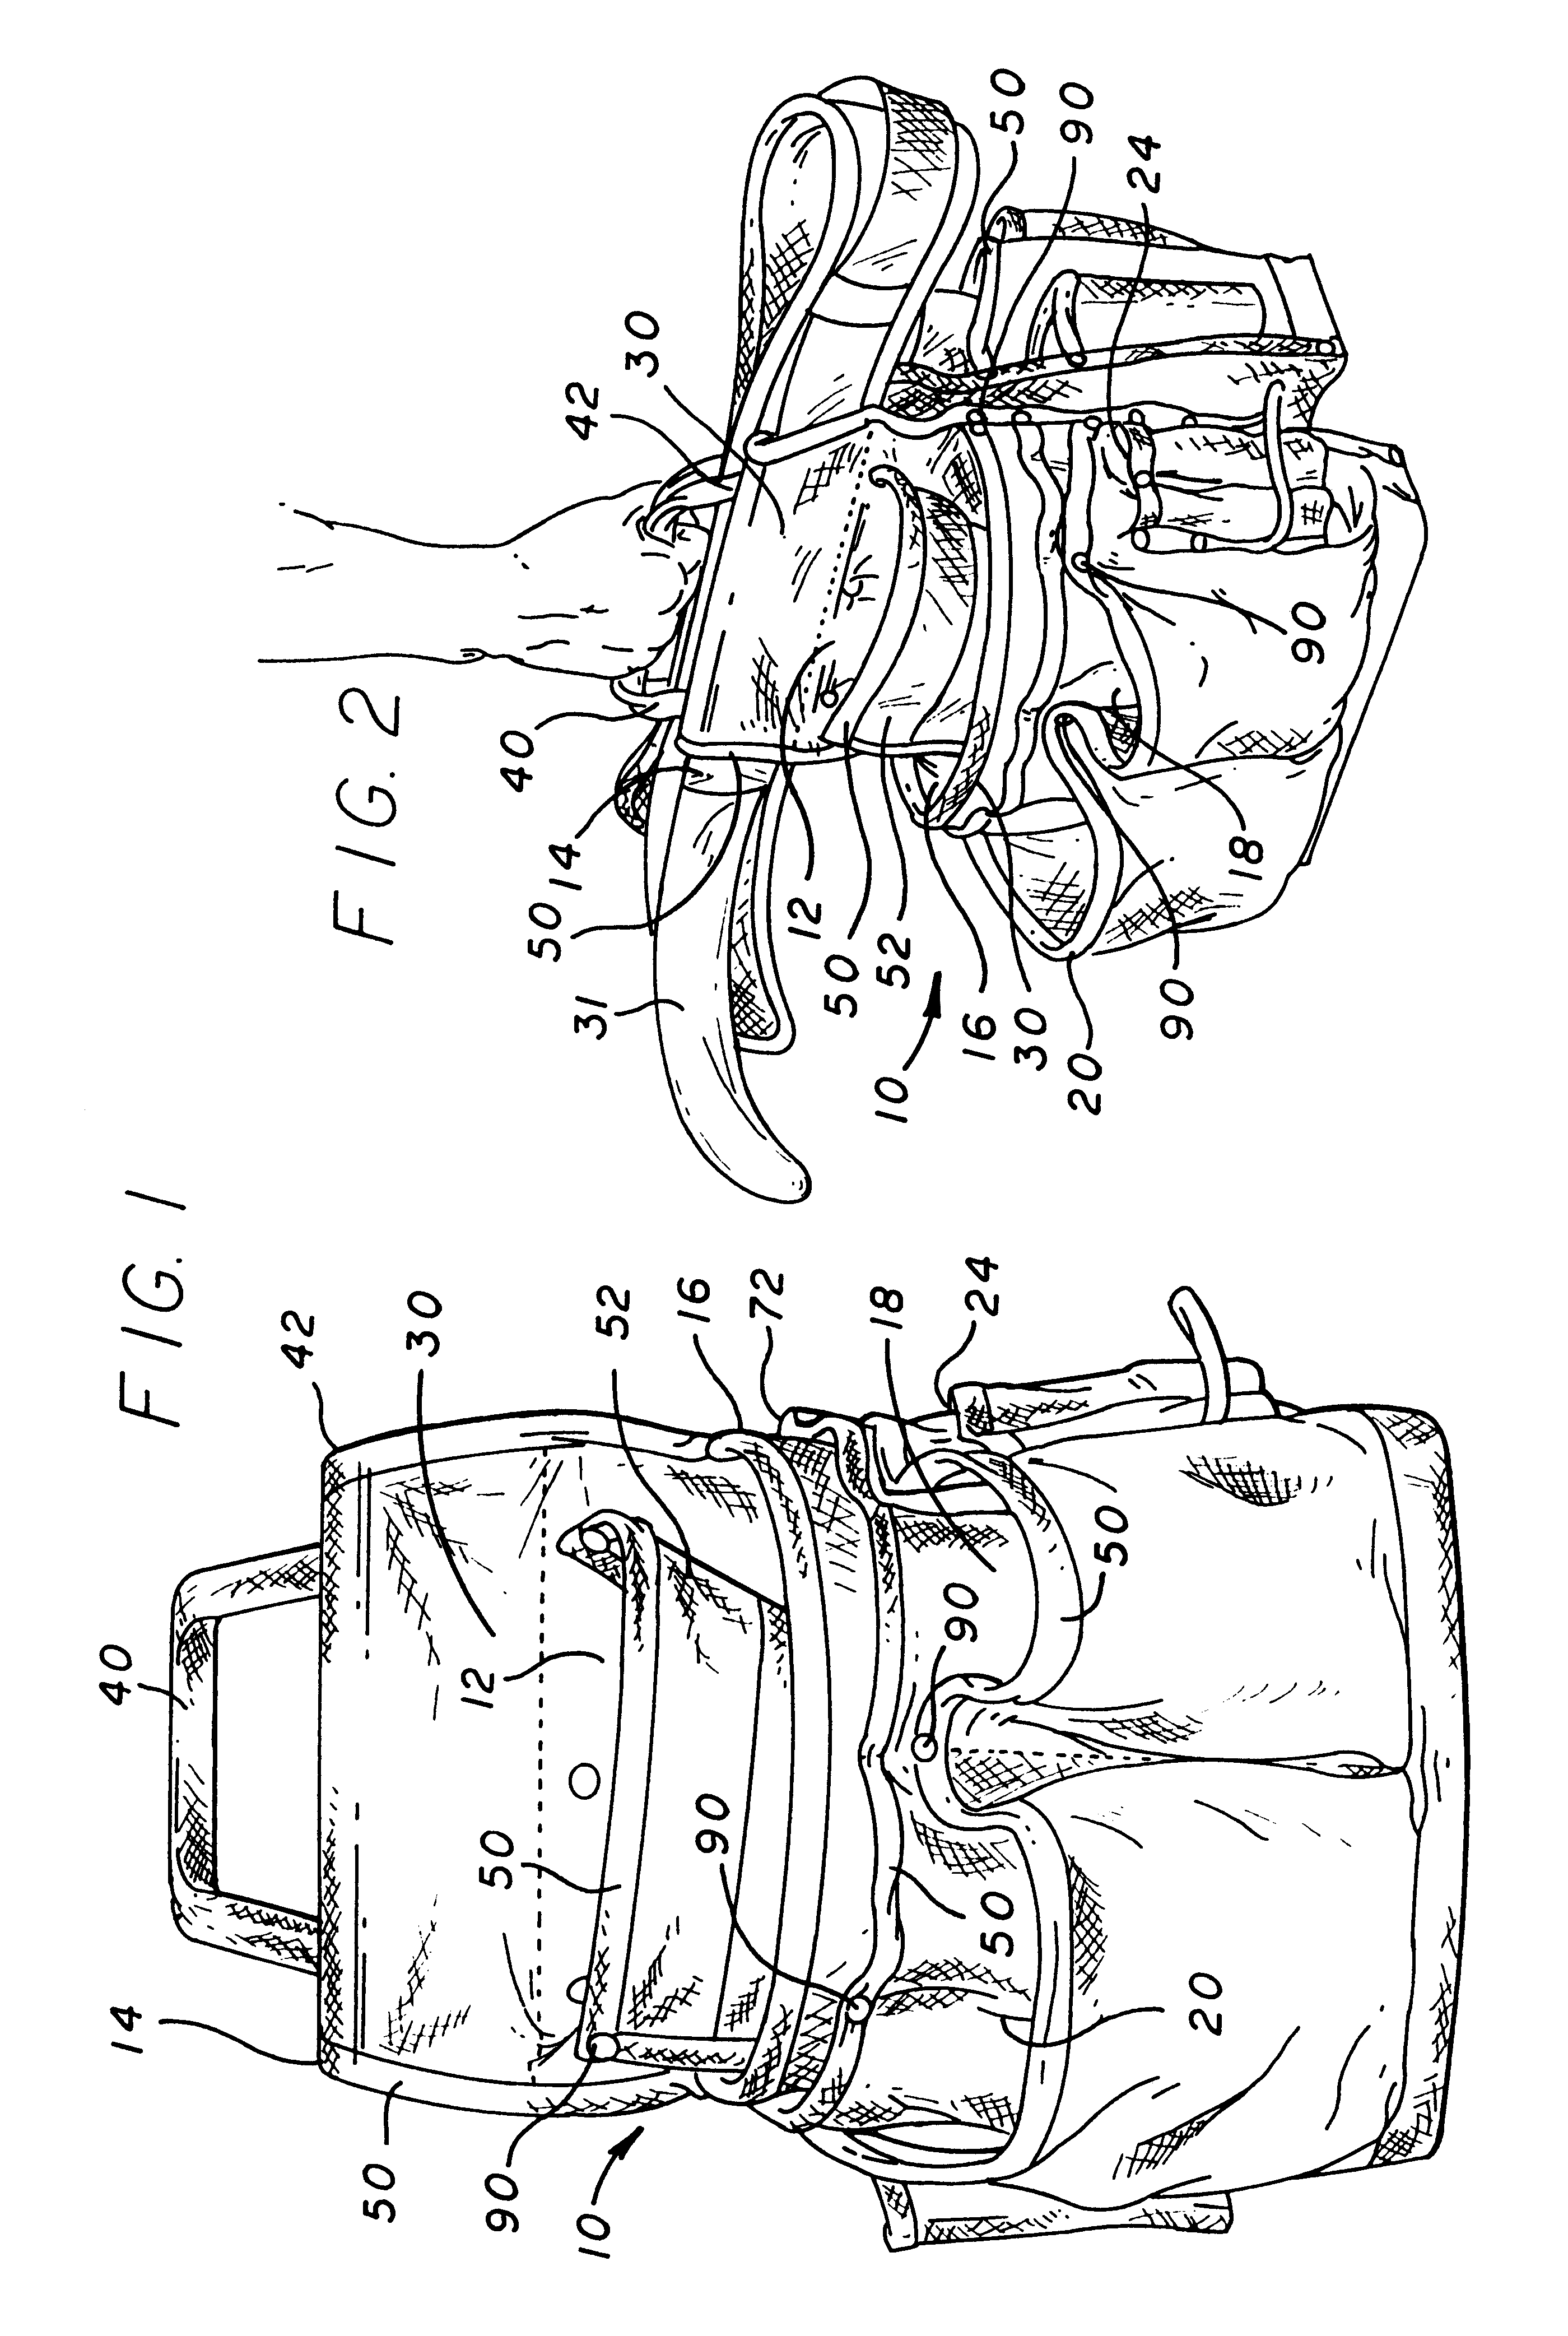 Specially configured tool carrier